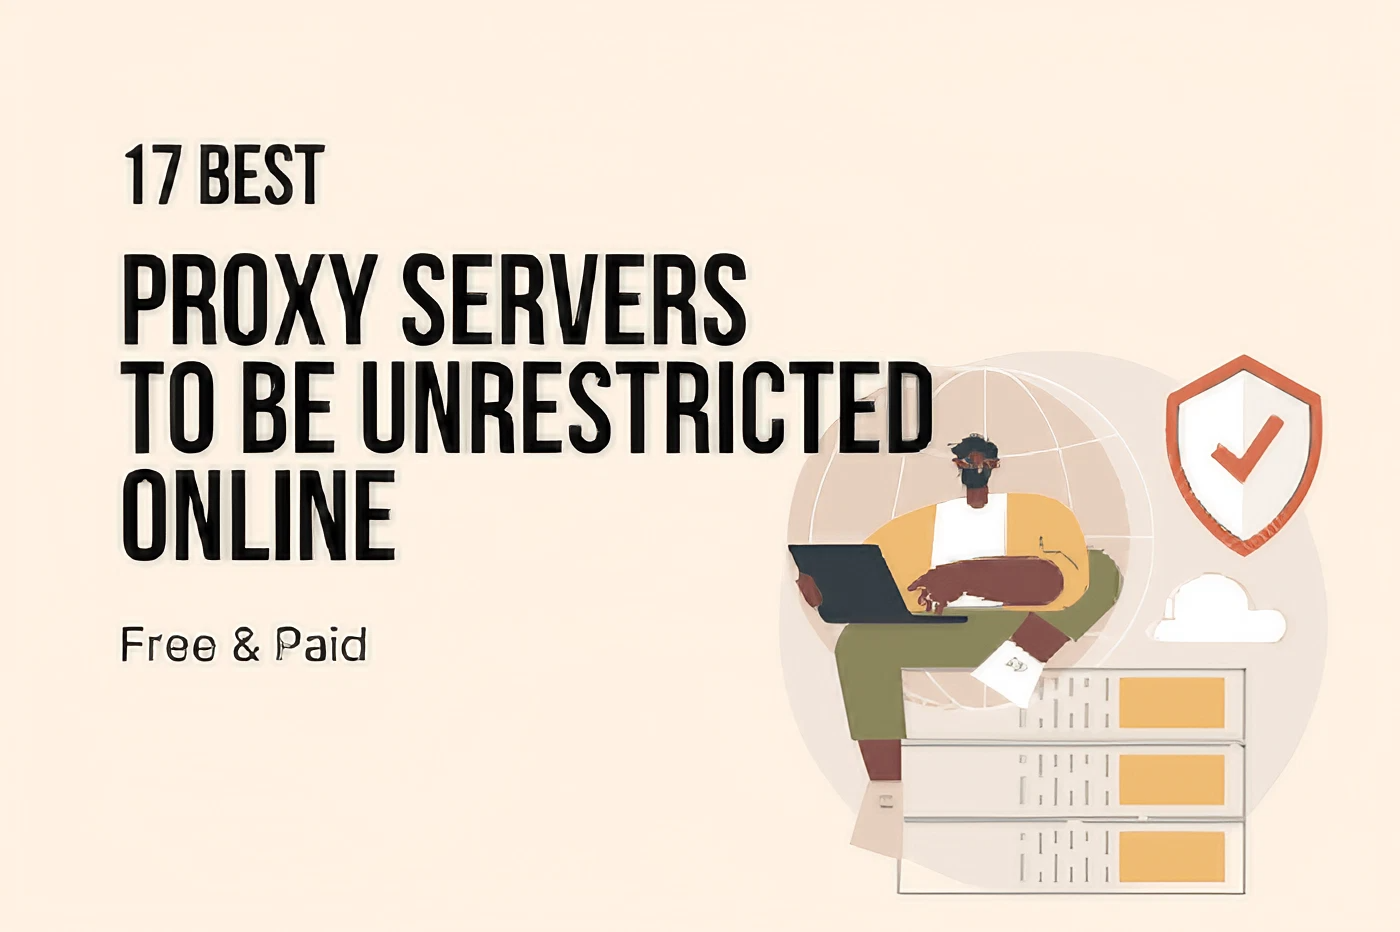 Top 17 Proxy Servers for Anonymous Web Browsing (Paid & Free)